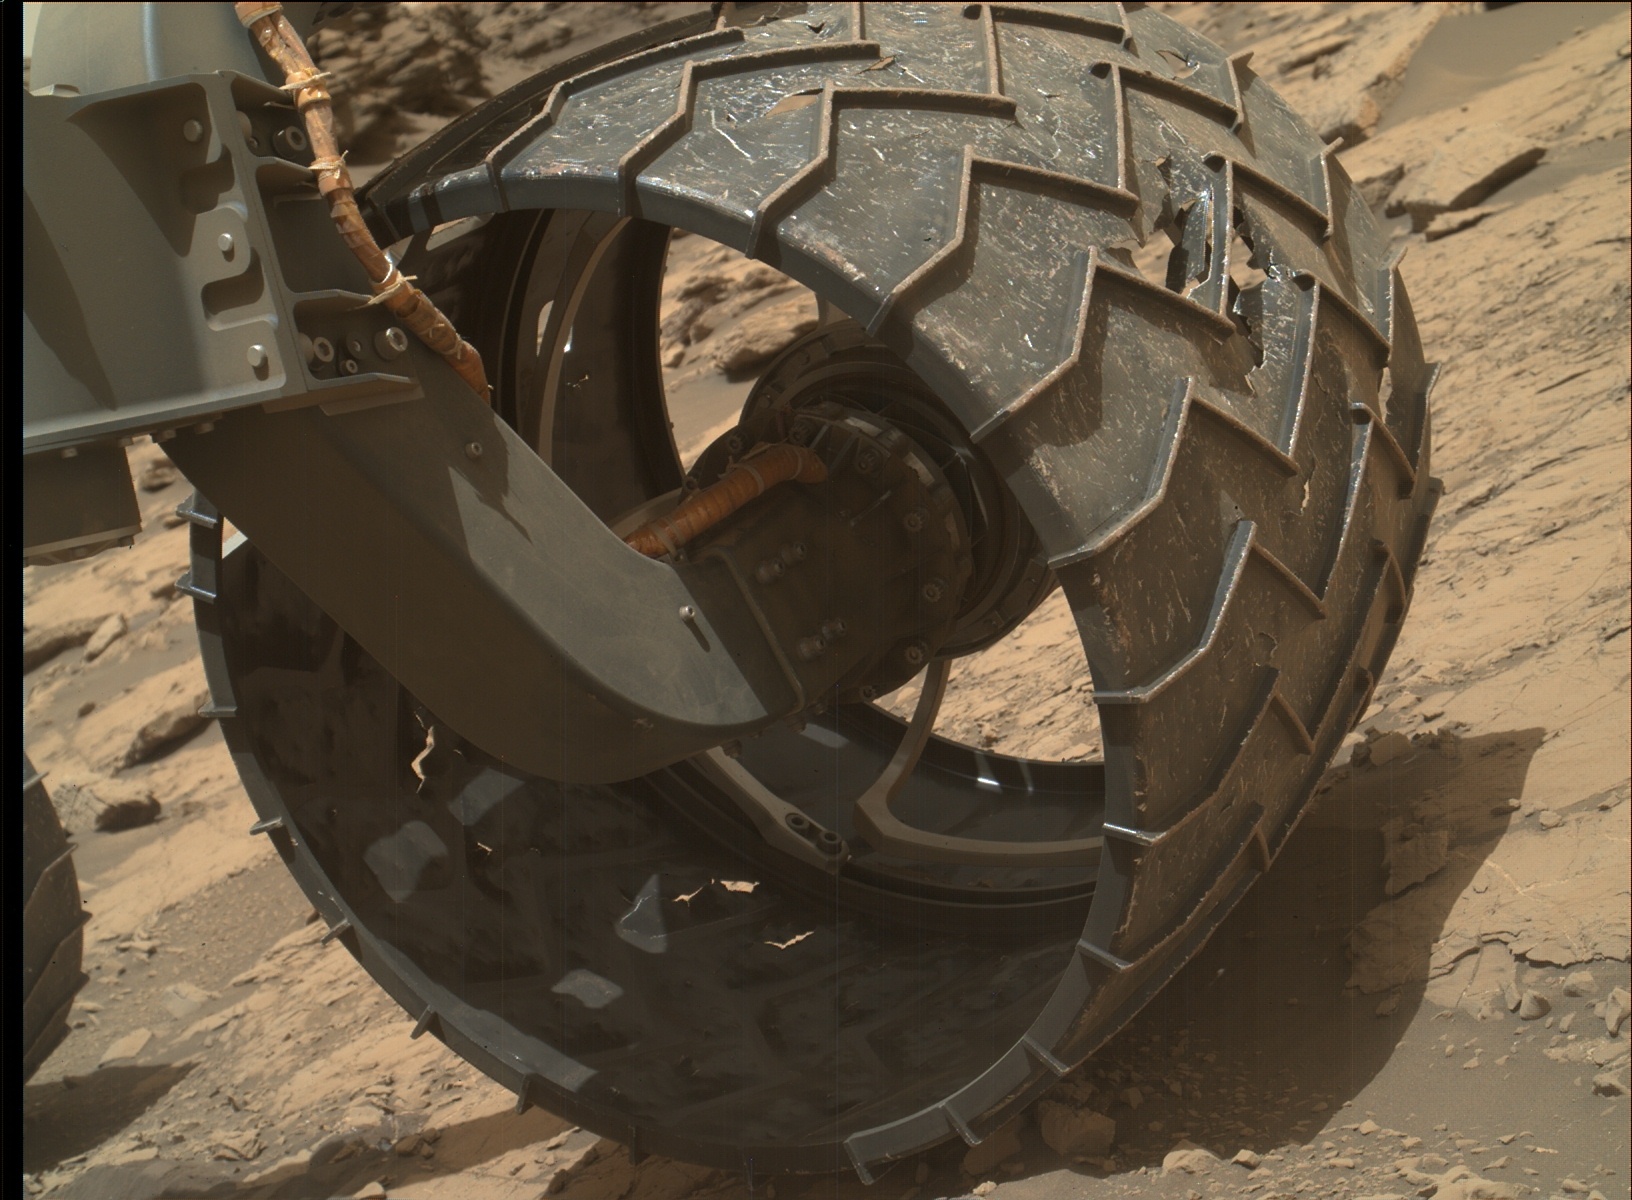 Nasa's Mars rover Curiosity acquired this image using its Mars Hand Lens Imager (MAHLI) on Sol 1435